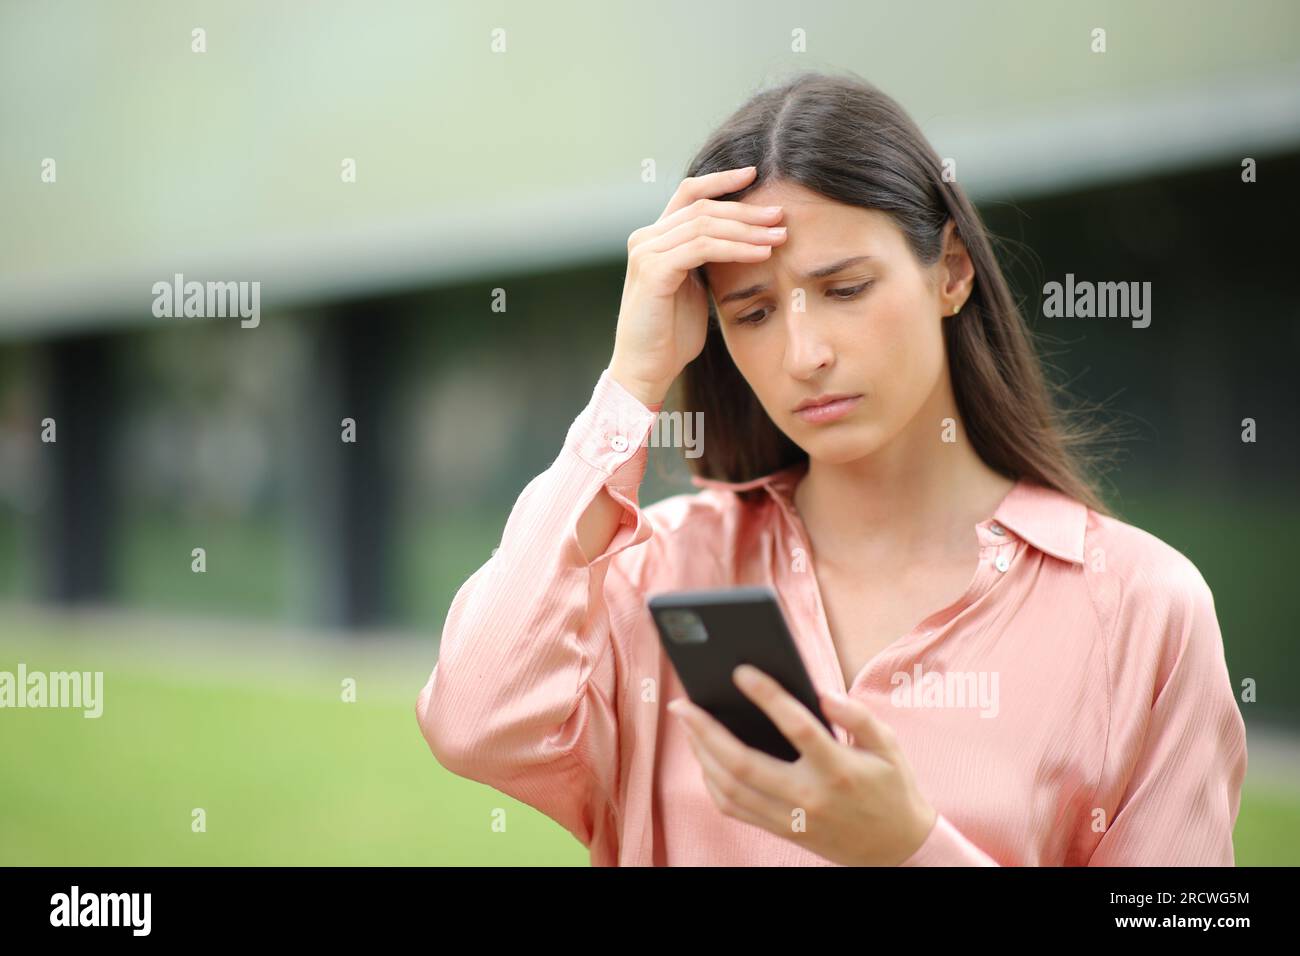 Concerned woman complaining checking news on phone in a park Stock Photo